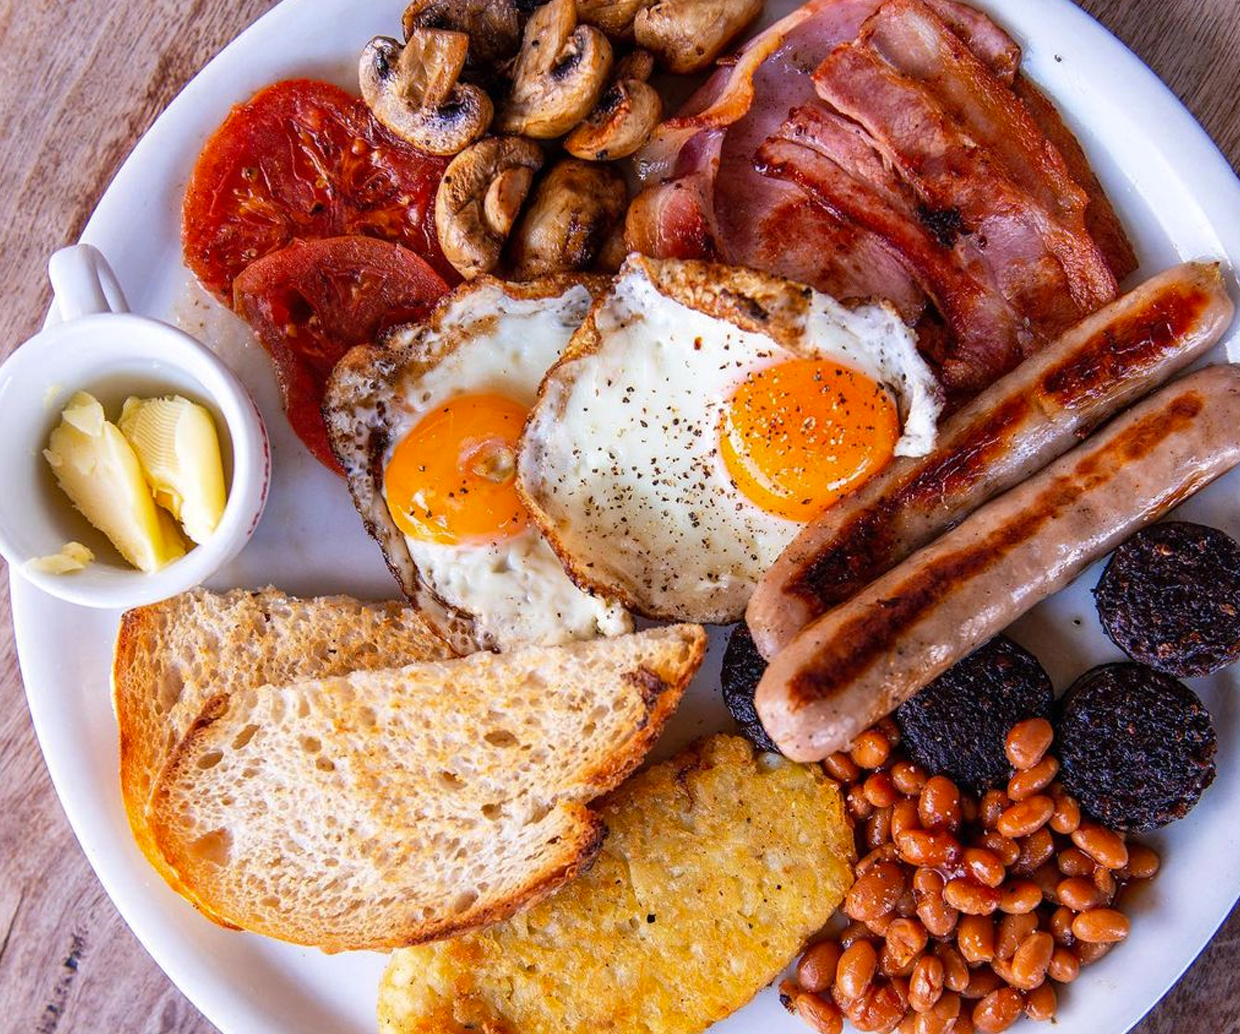 beans, sausages, eggs, bacon on a plate